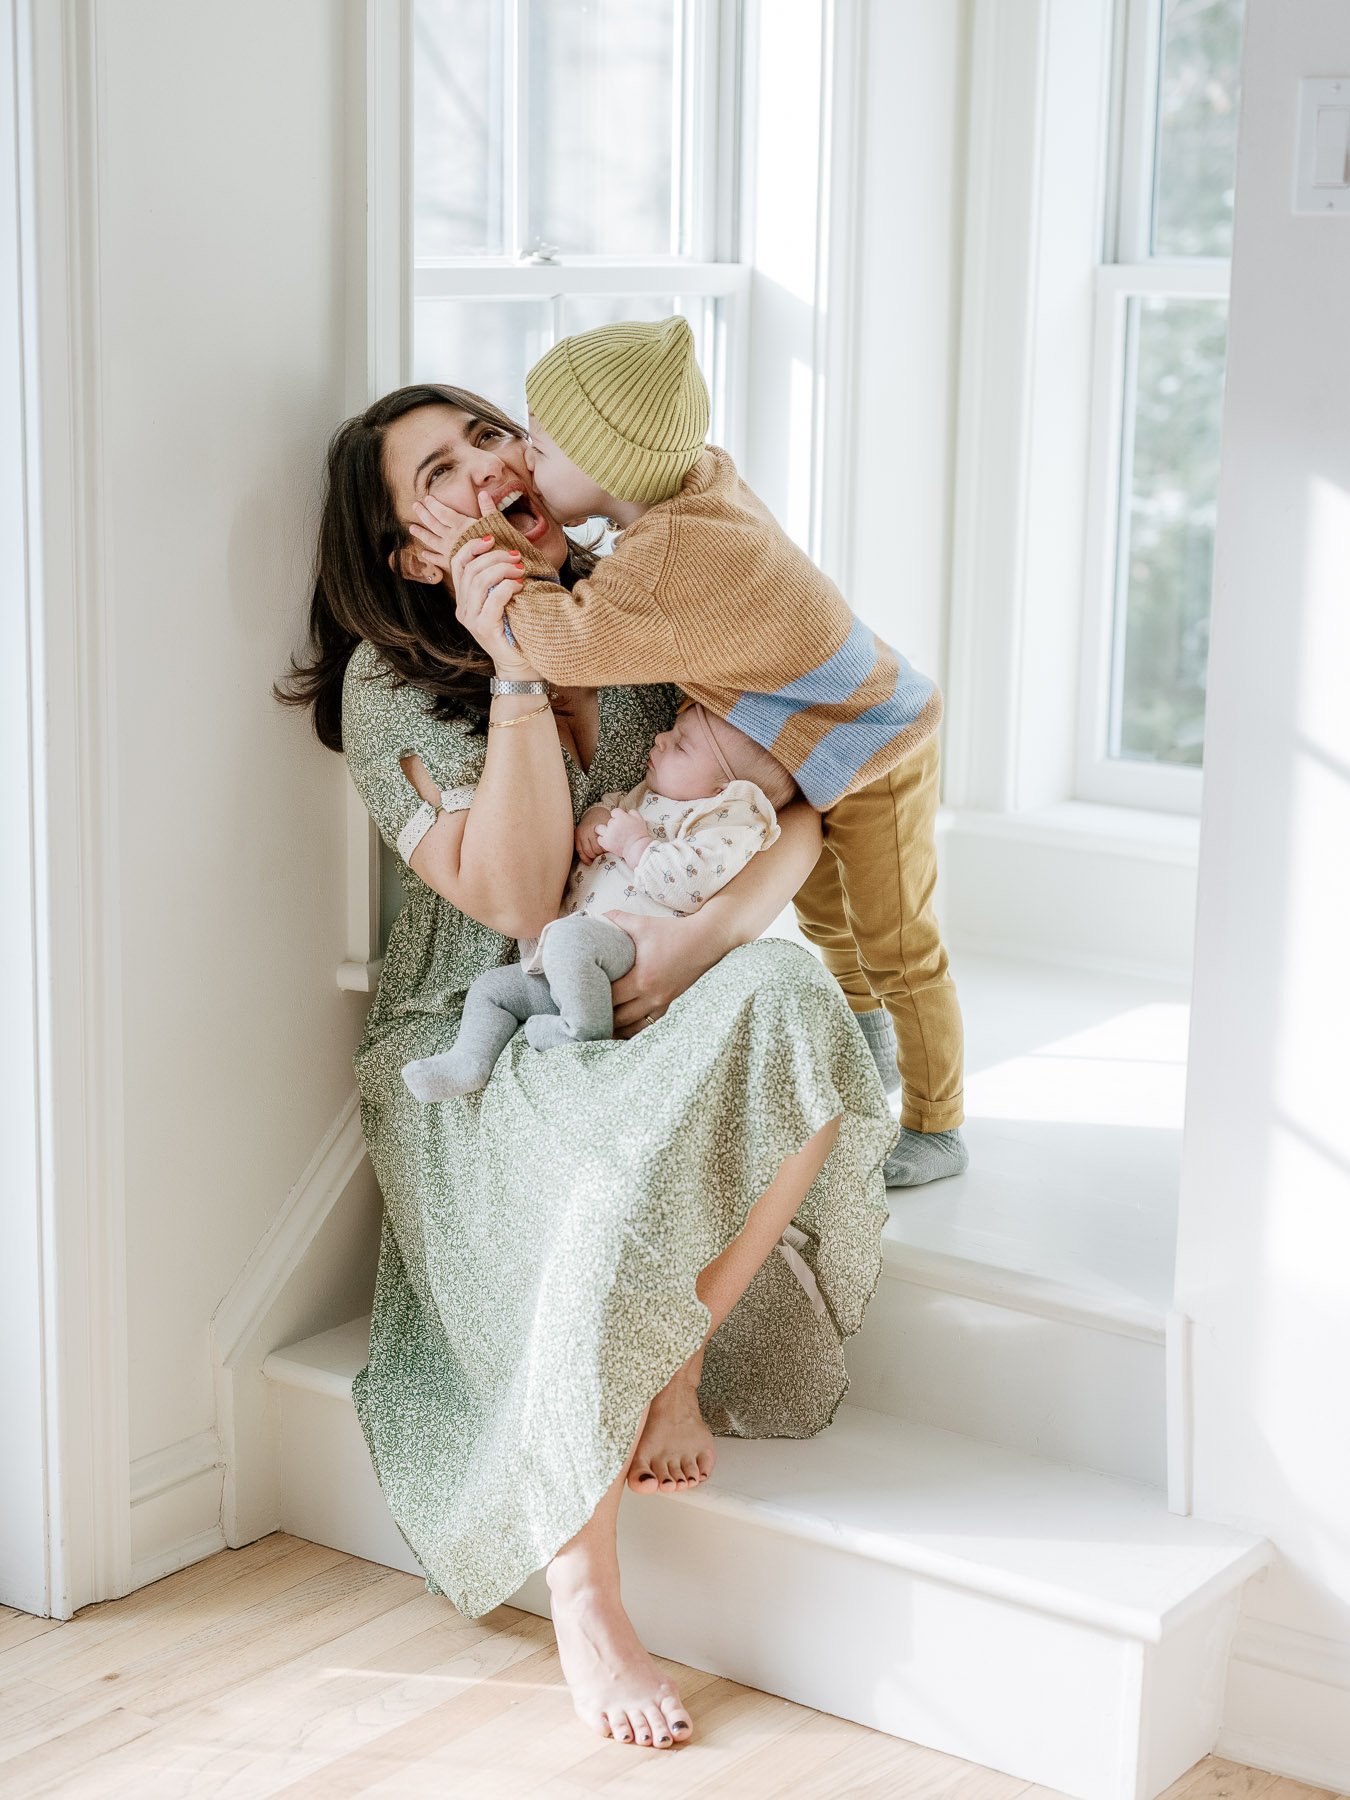 Saratoga Springs Newborn and Family Portraits by Michelle Lange Photography-14.jpg